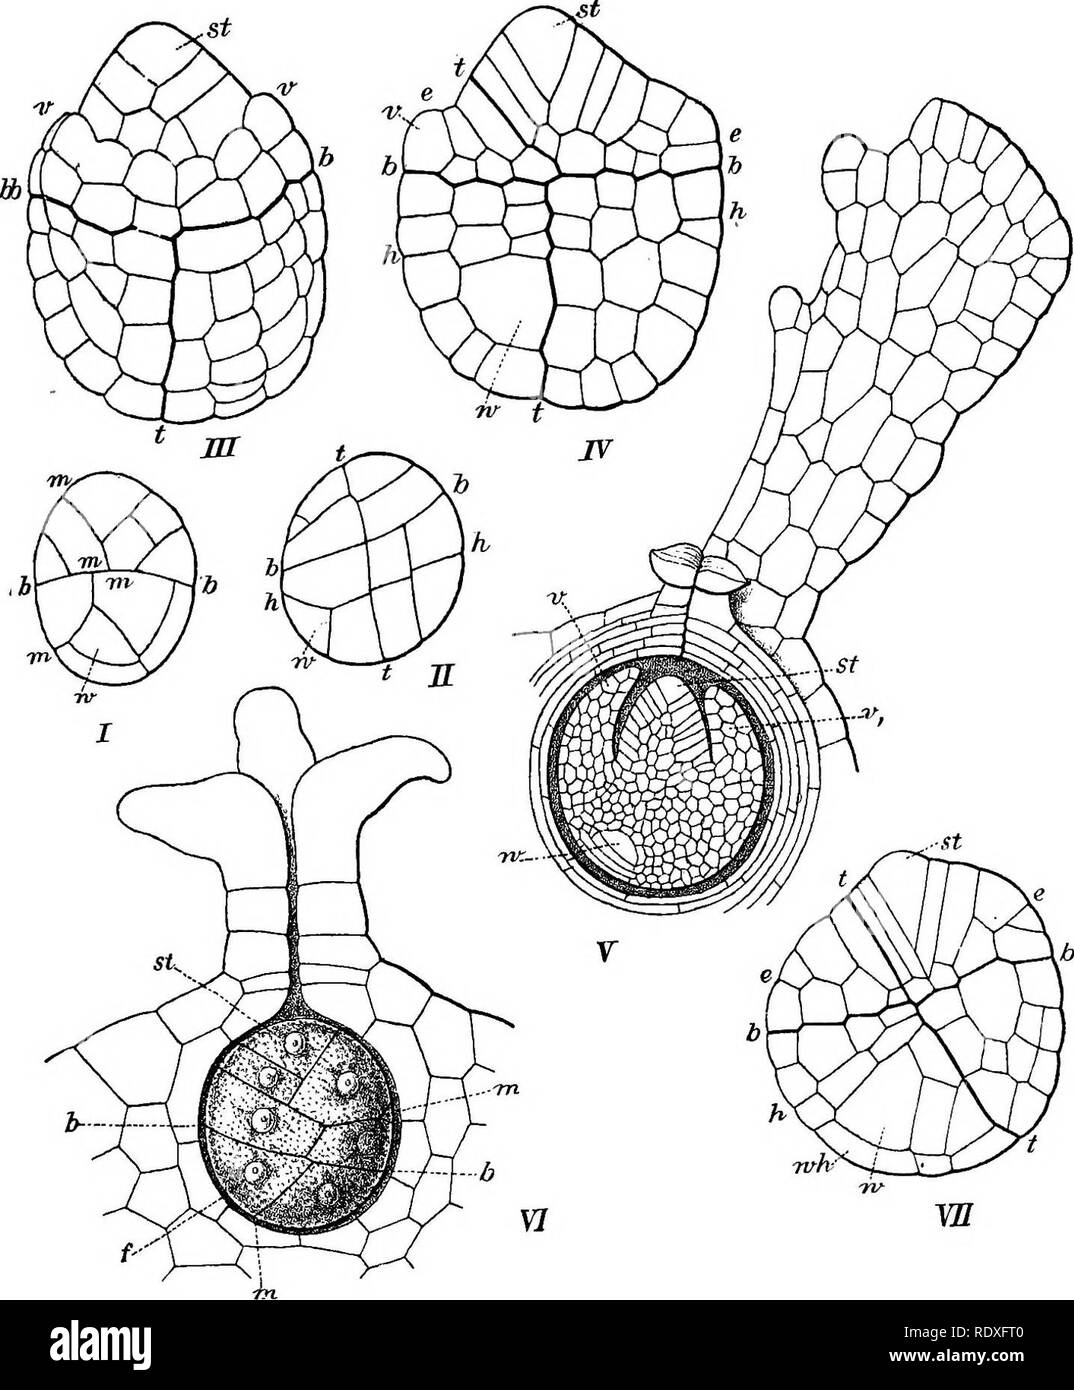 . The origin of a land flora, a theory based upon the facts of alternation. Plant morphology. EMBRYOLOGY 393. Fig. 214. Embryo of Equisetum. I.-IV., Equisetum arvense, L. I. and II., the same embryo in different positions : in I. the median wall is visible, in II. the transverse wall. X 300. III.-IV., a more advanced embryo showing development of the stem and leaf-sheath, X250. V., an embryo still further developed, but not dissected free from the prothallus, and showing the orientation relatively to the archegonium. j/=the stem apex ; z»=the first leaf-sheath; w=the root. X98. VI. and VII., E Stock Photo